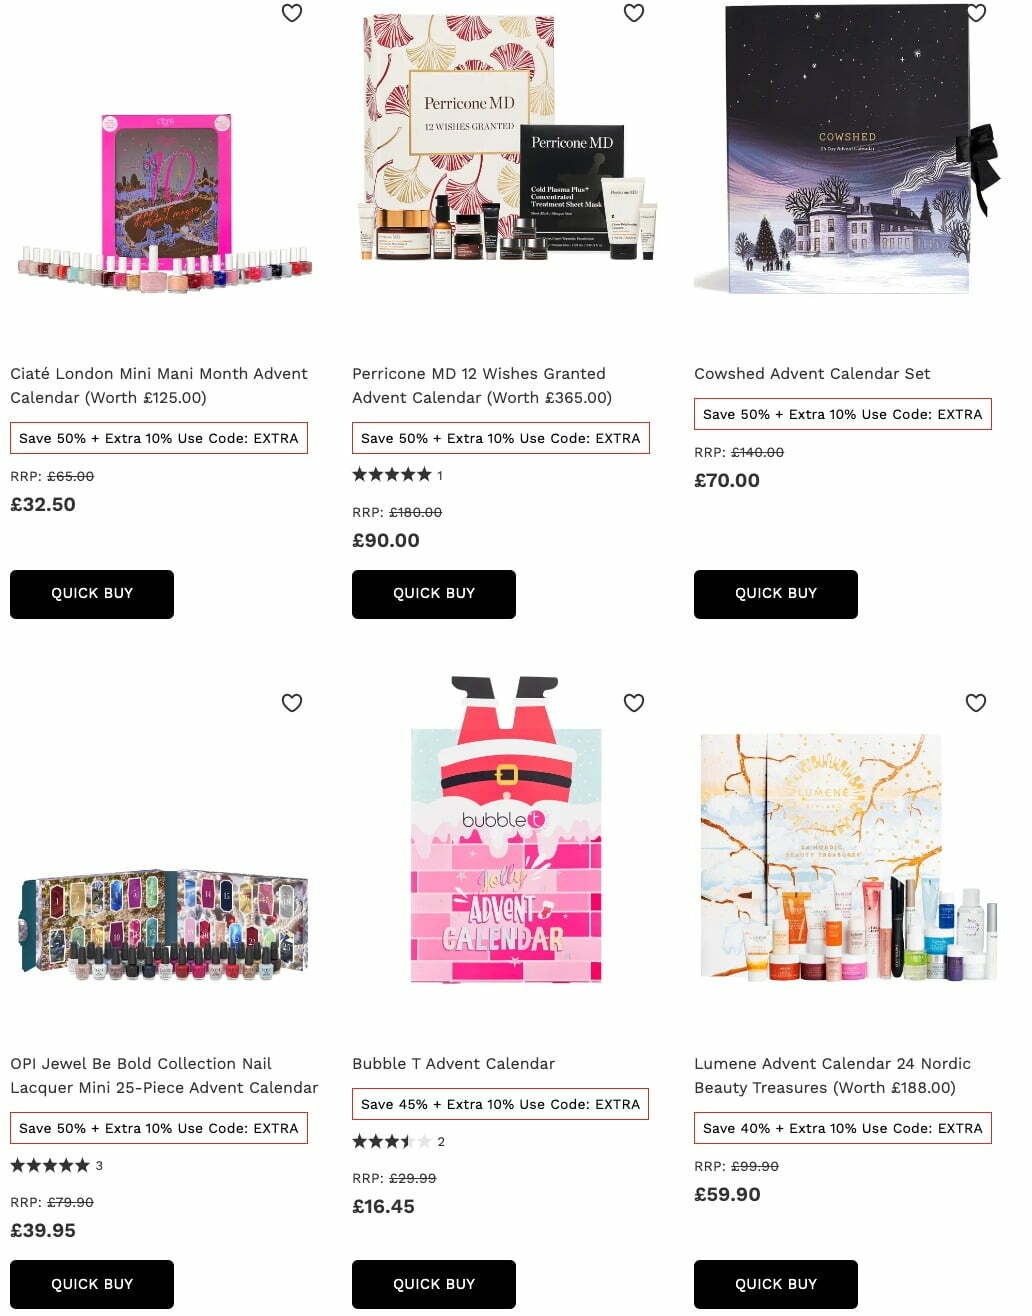 Up to 50% off Advent Calendars at Lookfantastic